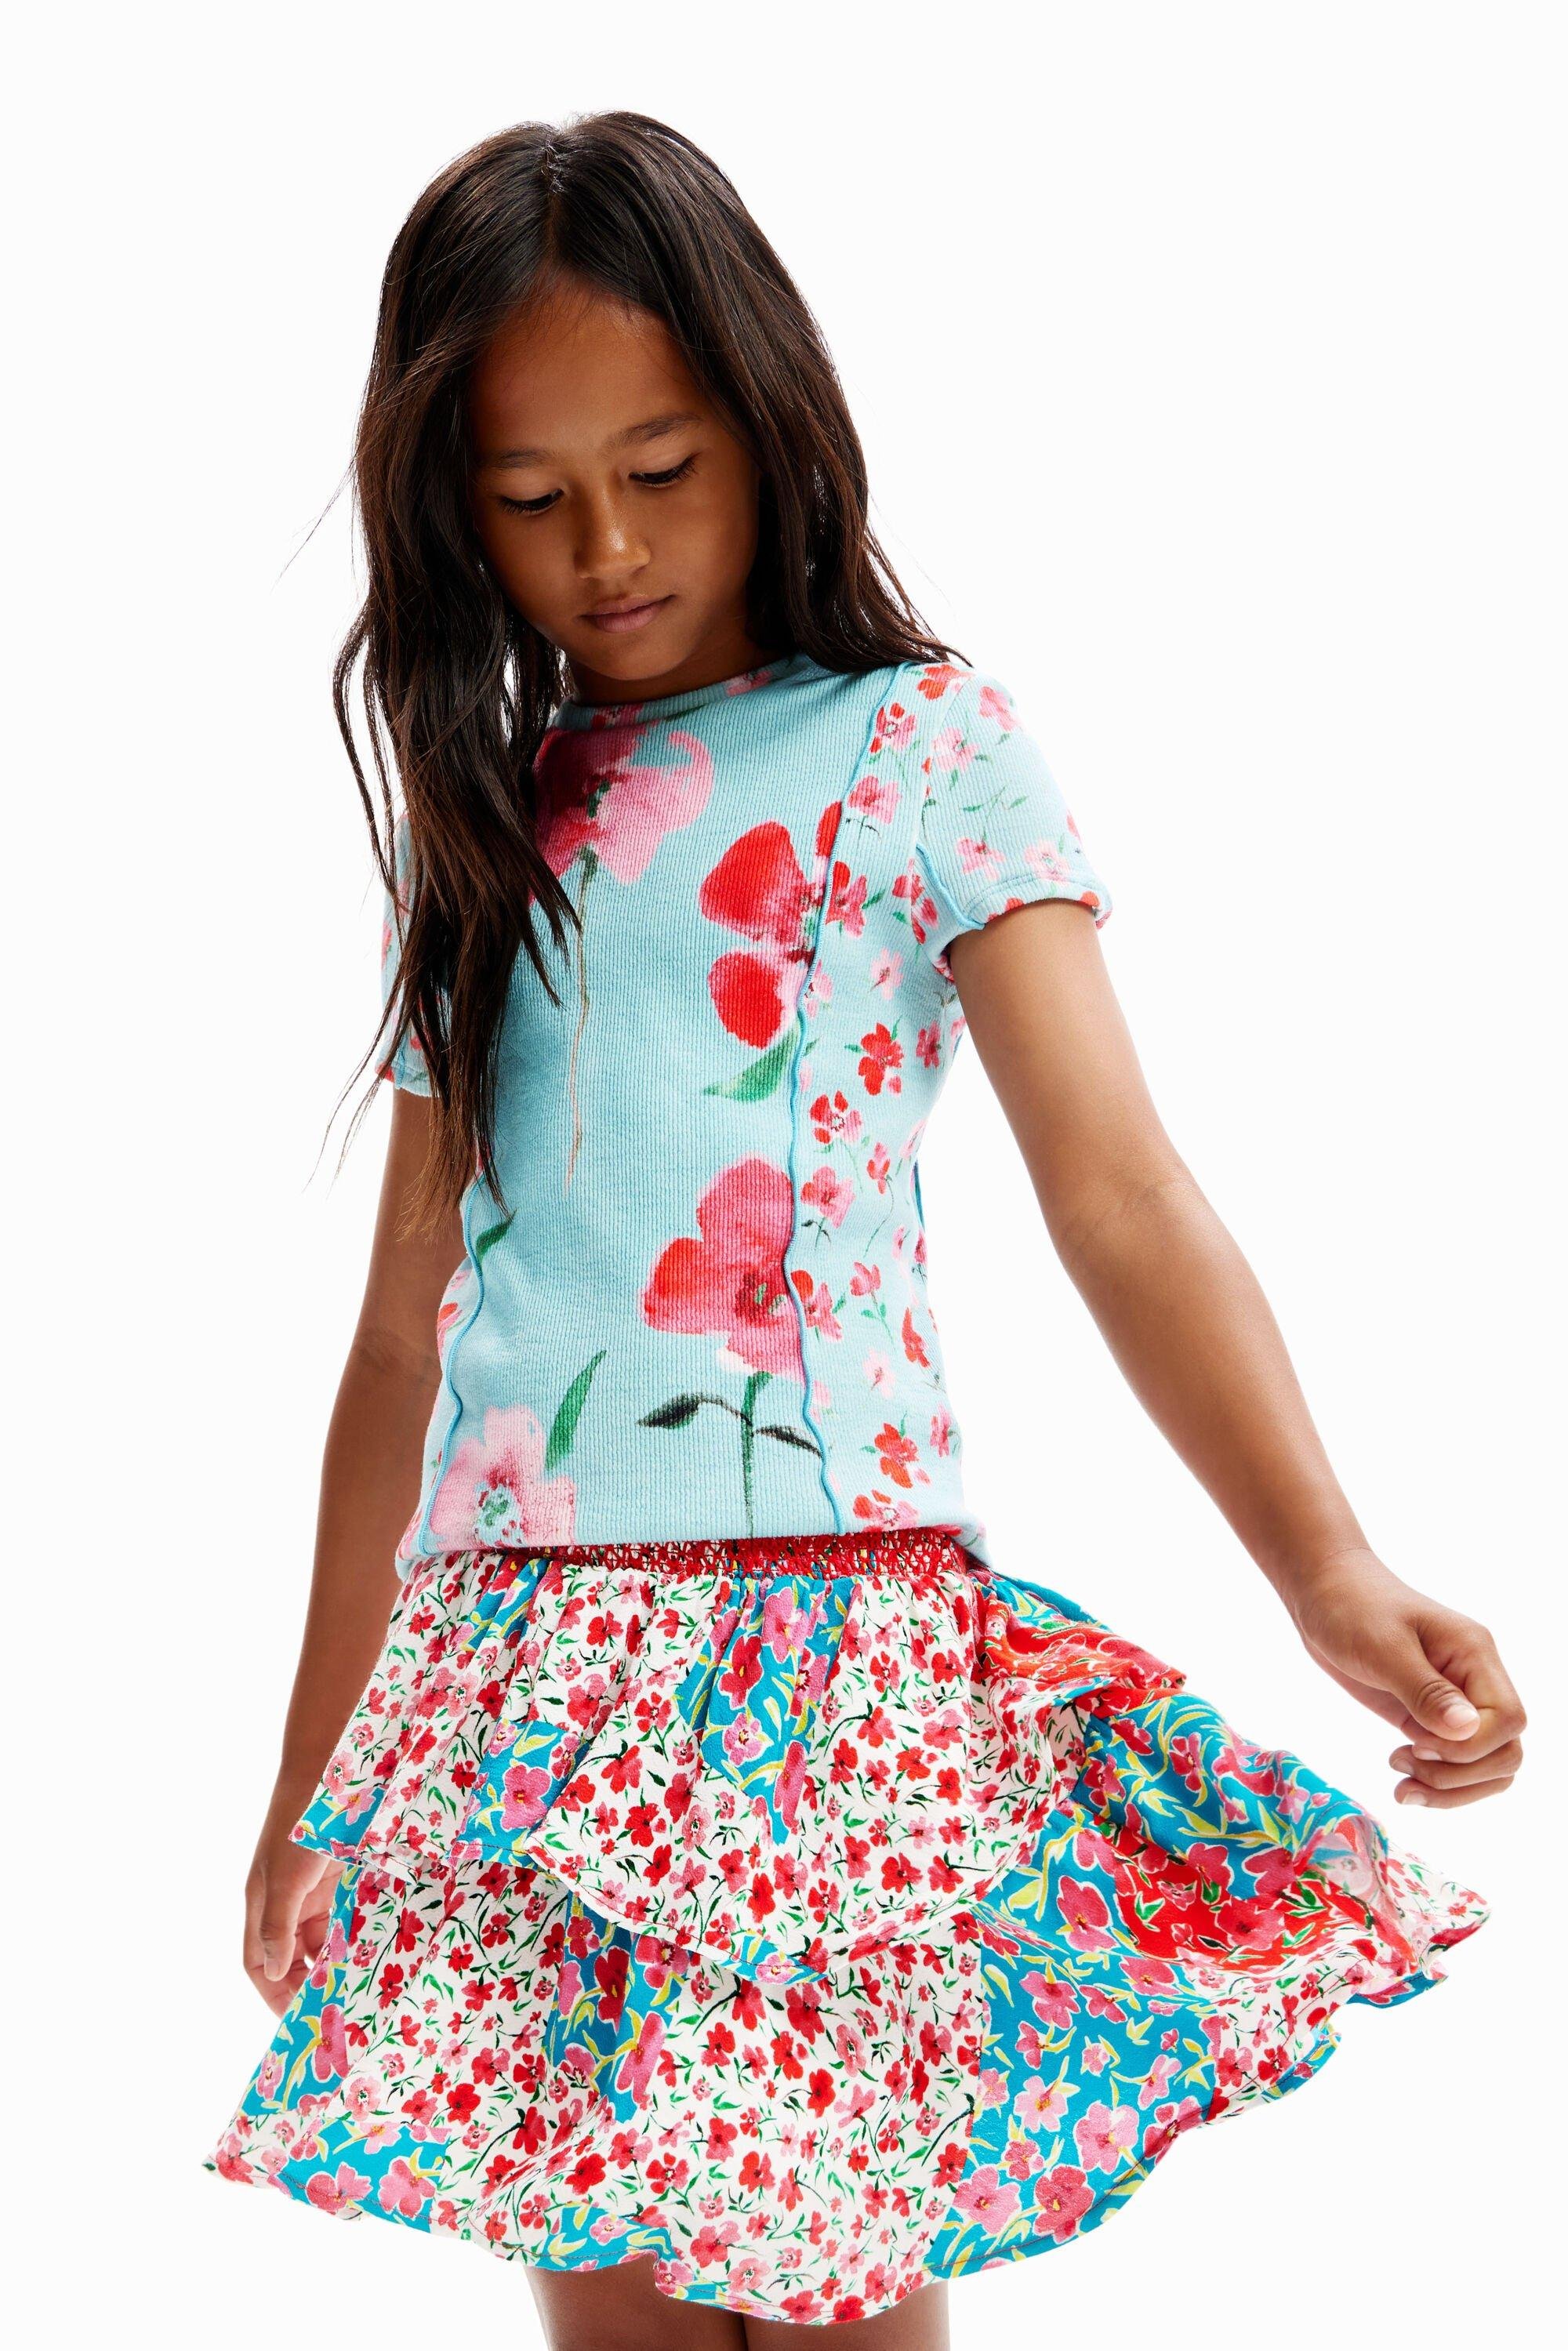 Floral ruffled mini skirt by DESIGUAL